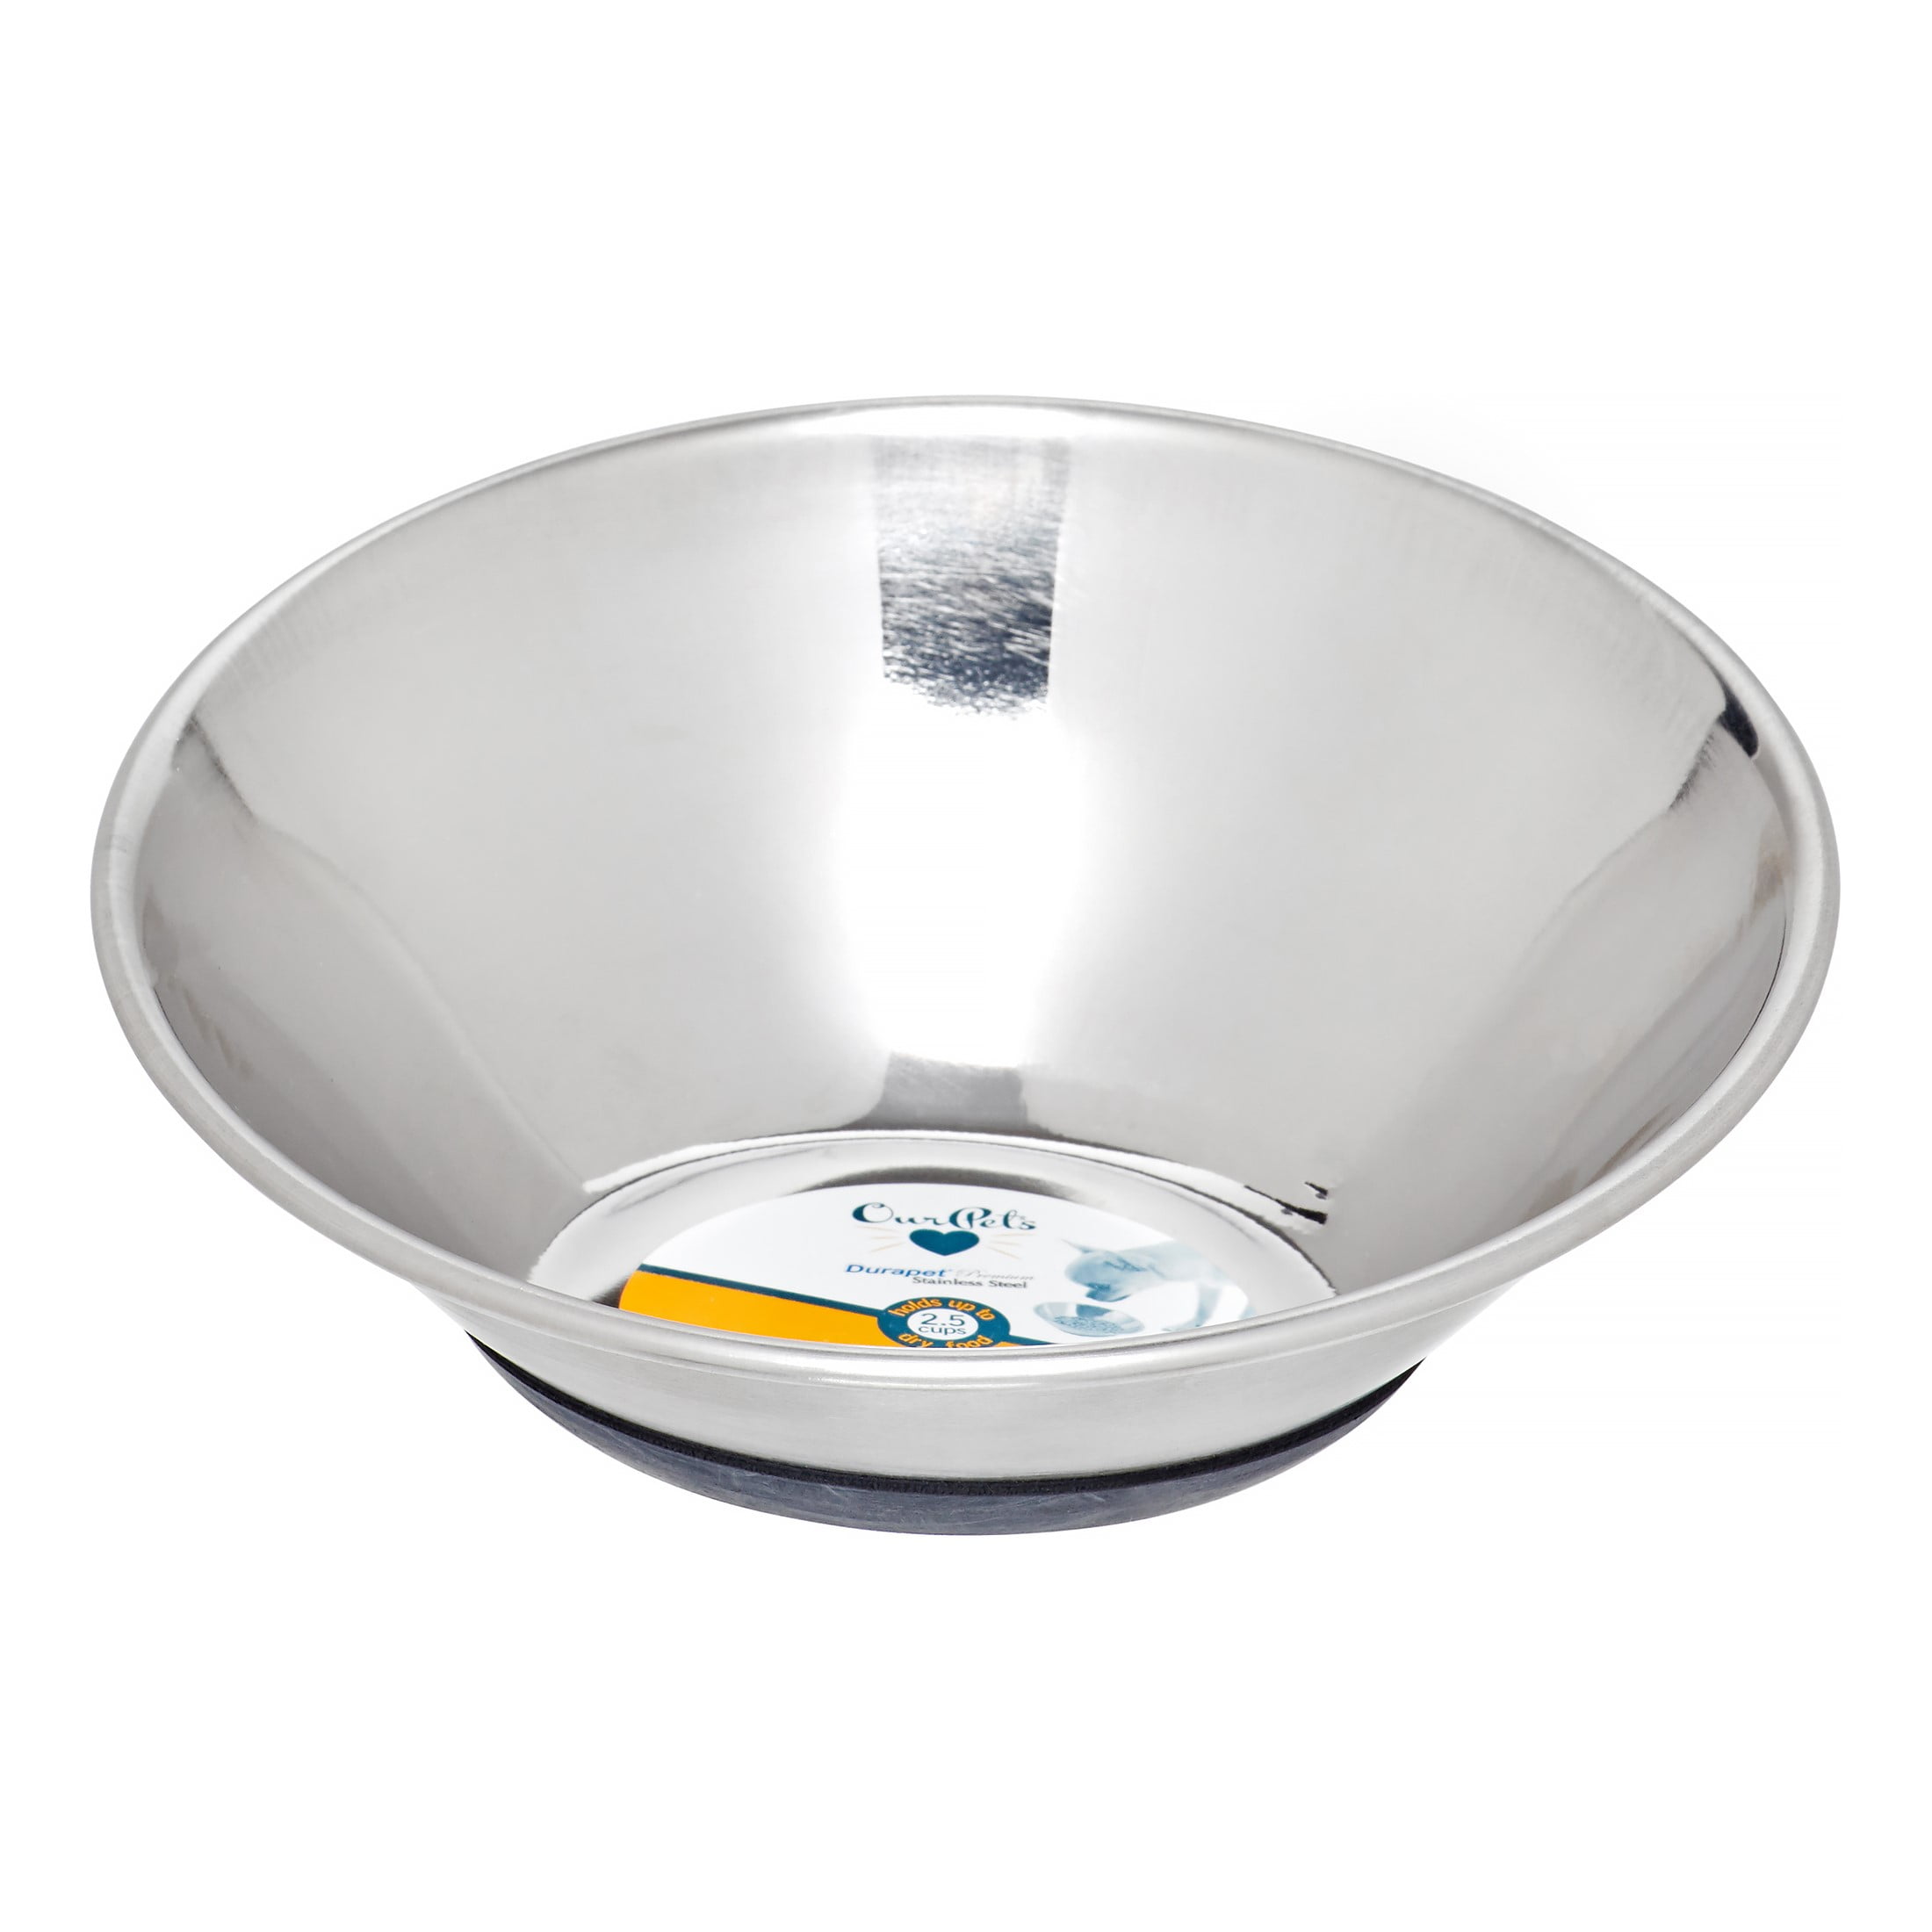 Picture of OurPets 090163 2.5 cup Stainless Steel Tilt-A-Bowl - Small